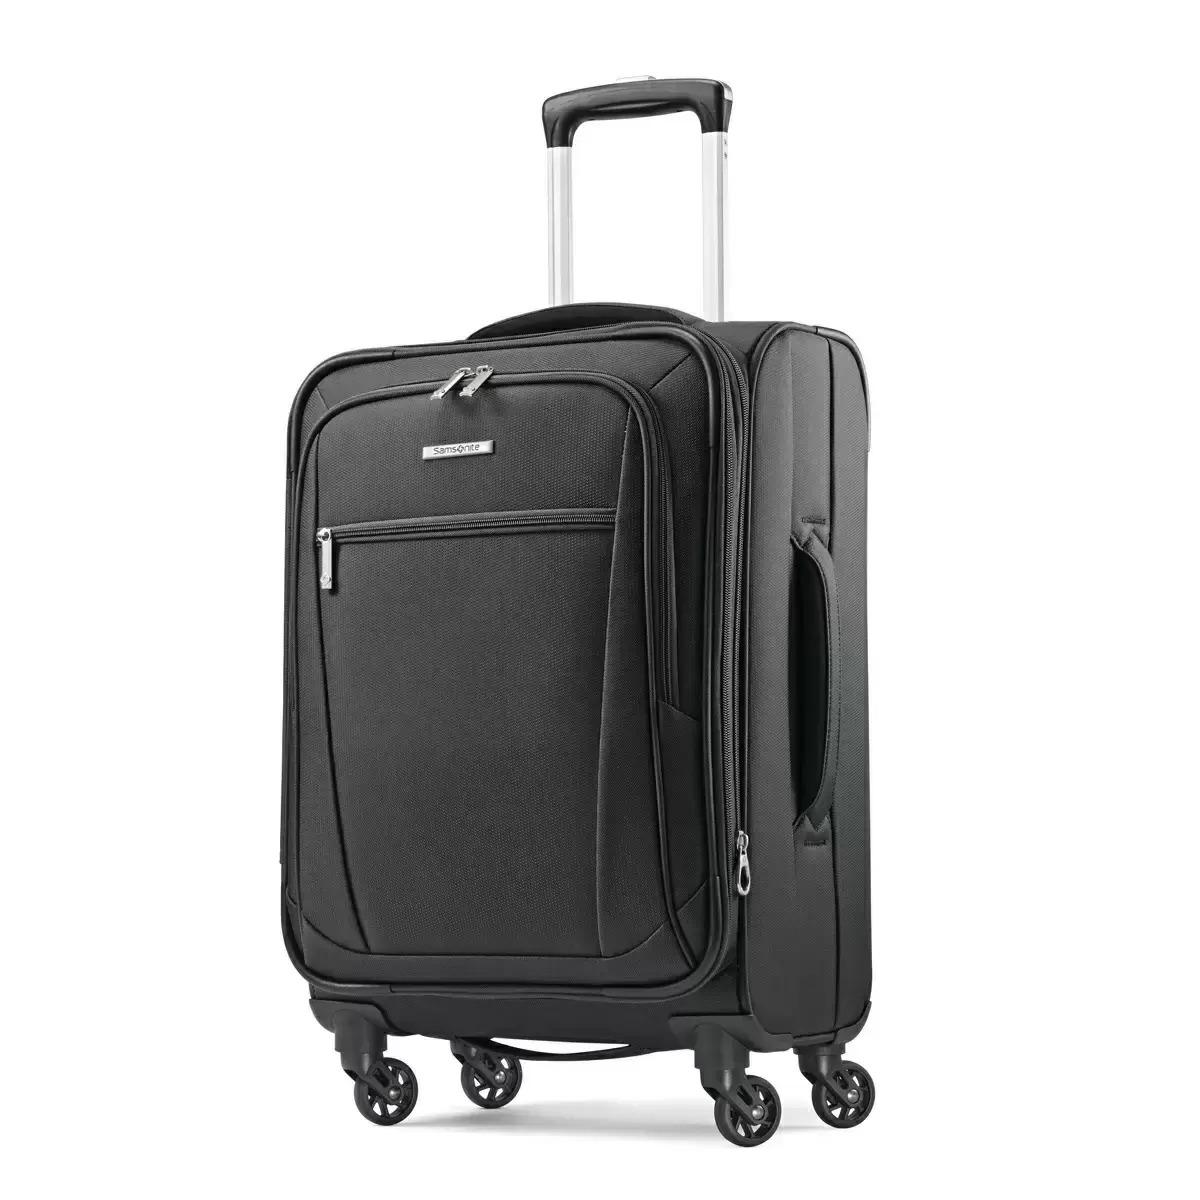 Samsonite Ascella I Carry-On Spinner Luggage for $63.99 Shipped